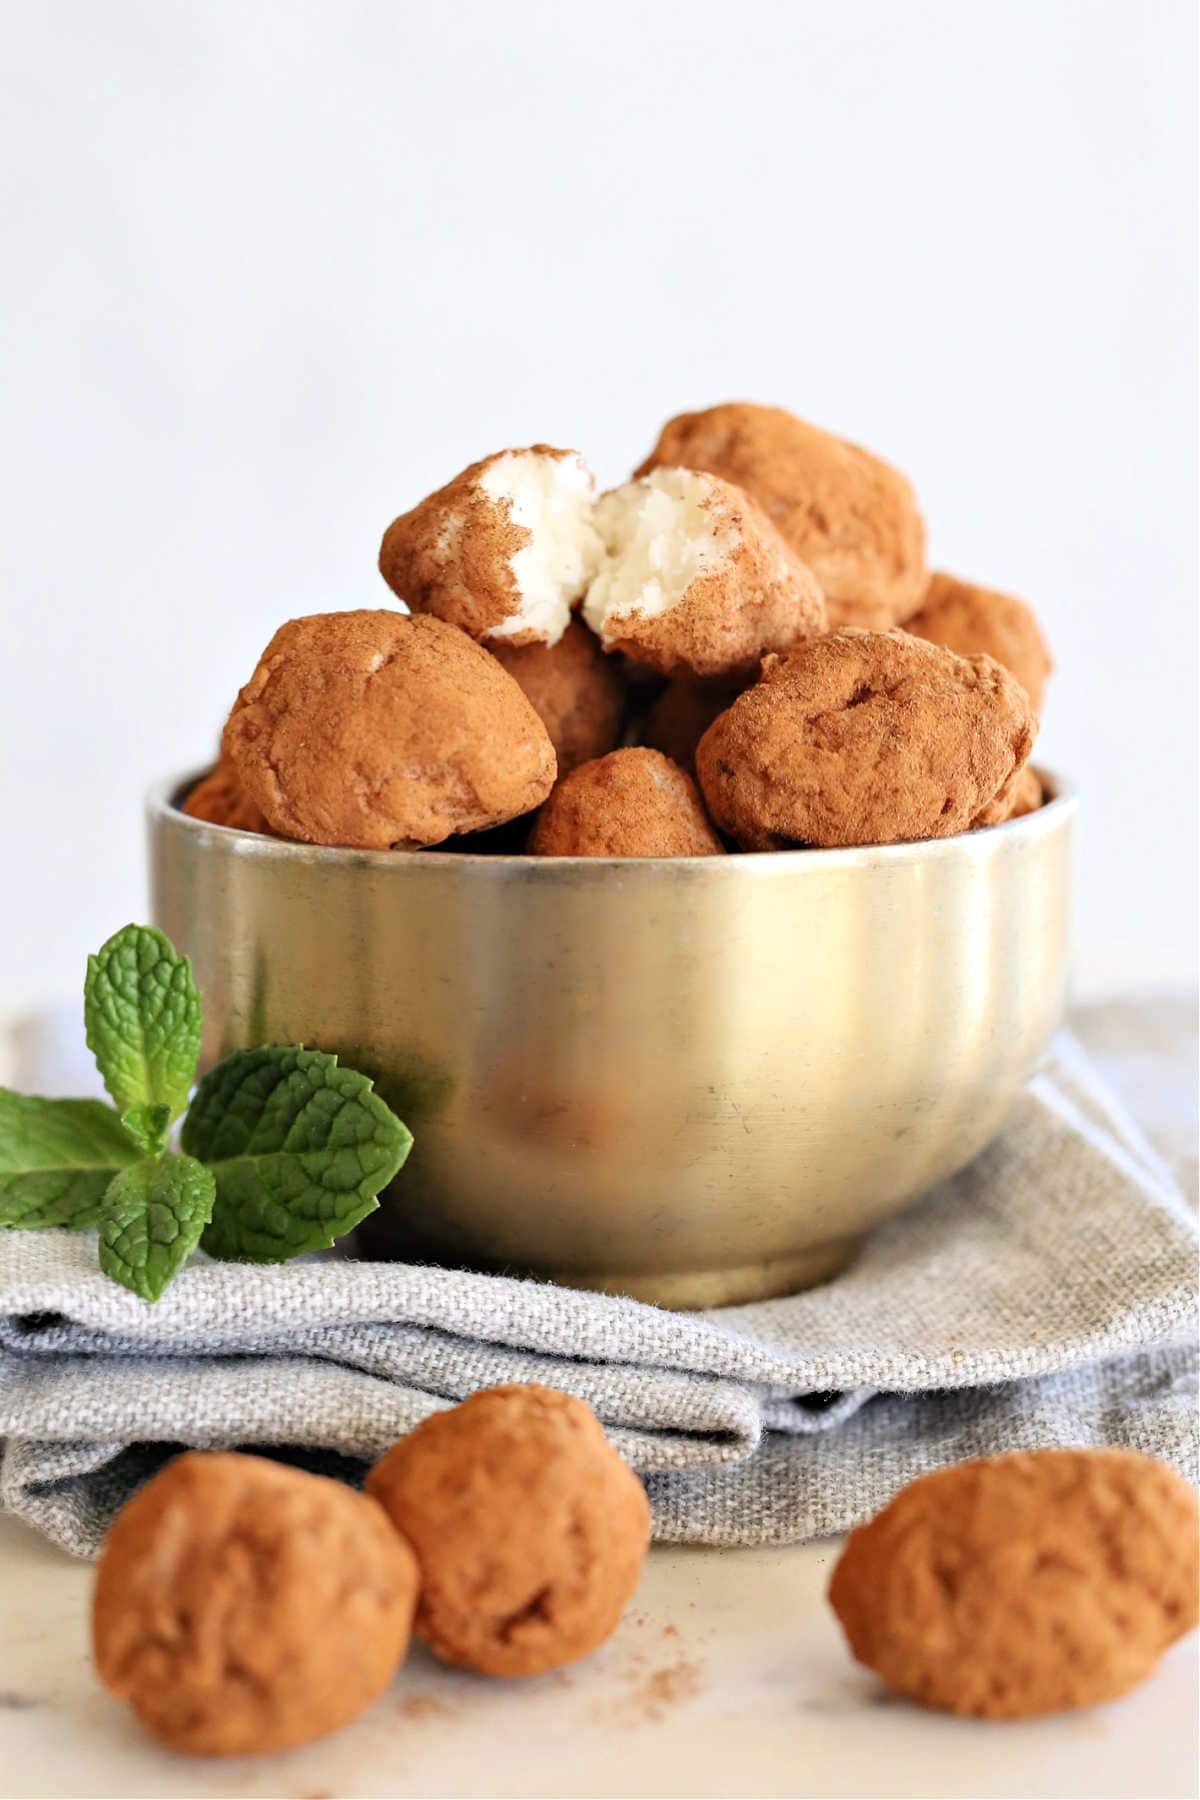 balls of homemade irish potato candy in a gold bowl on a towel with fresh mint